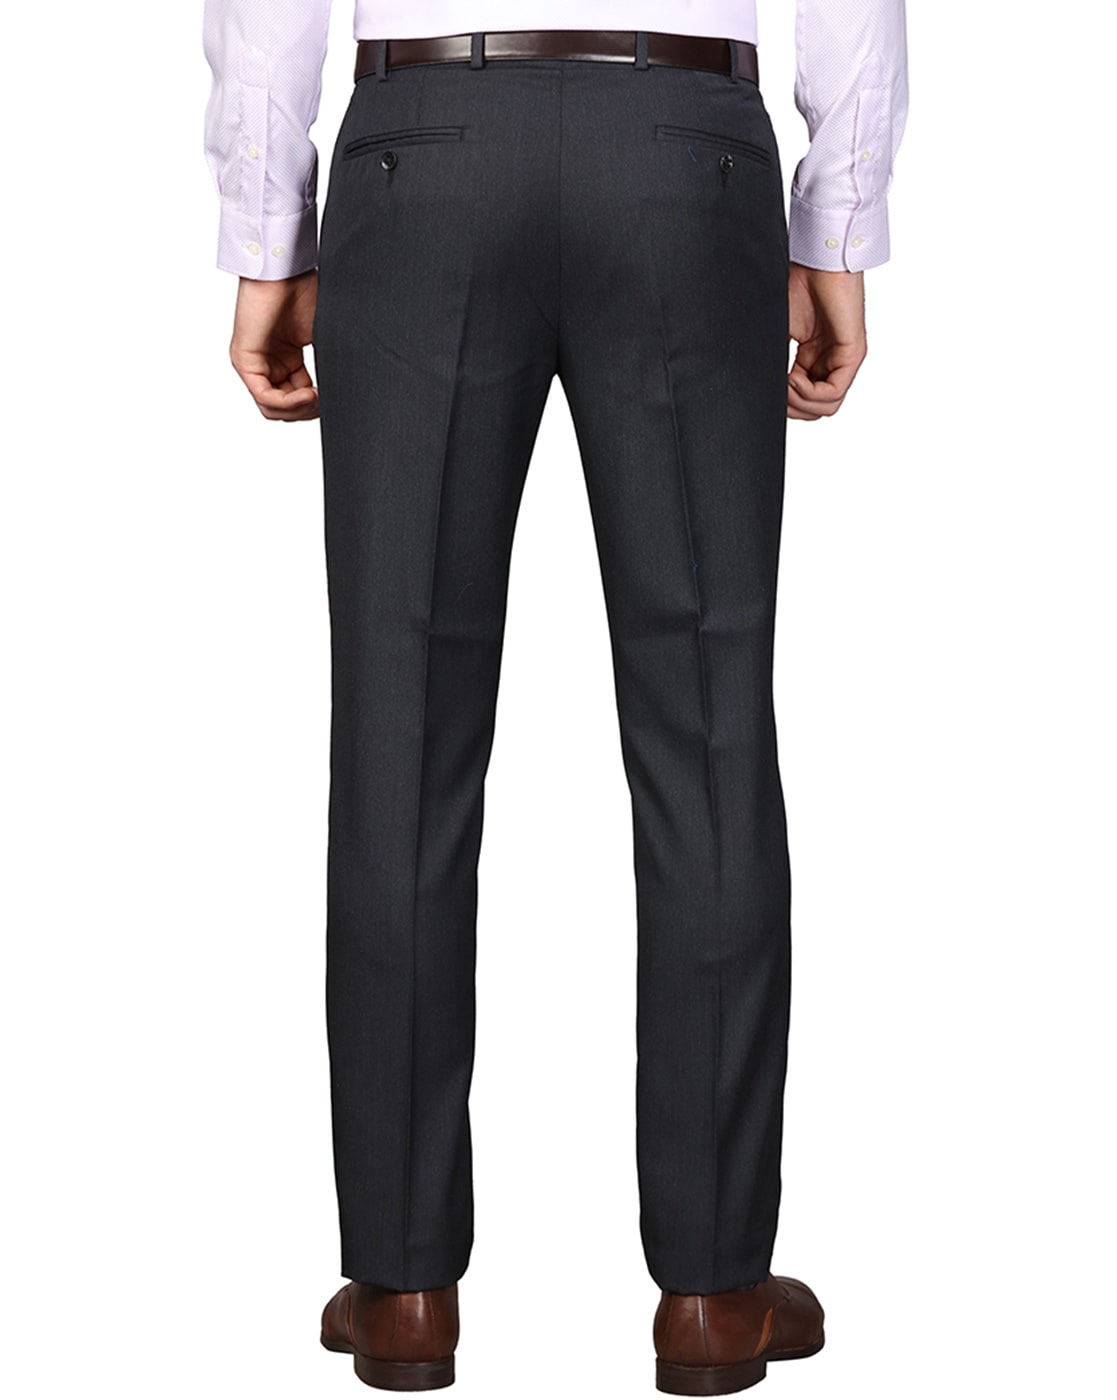 Buy Next Look Mens Relaxed Fit Formal Trousers SMTX00015K8Black30W x  34L at Amazonin